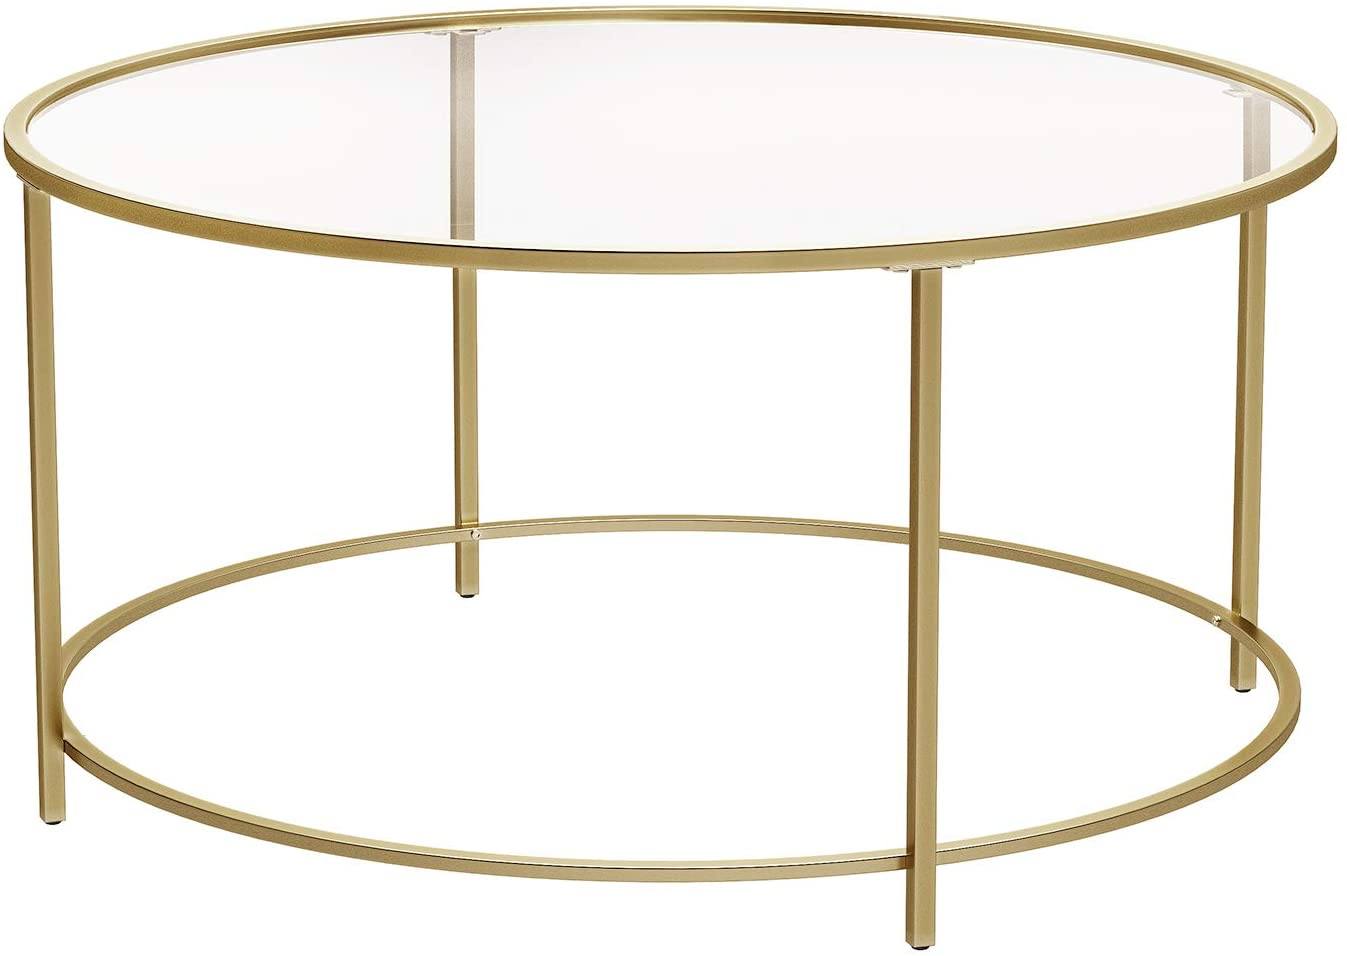 Round Coffee Table, Glass Table with Golden Iron Frame, Living Room Table, Sofa Table, Robust Tempered Glass, Stable, Decorative, Gold LGT21G RAW58.dk 